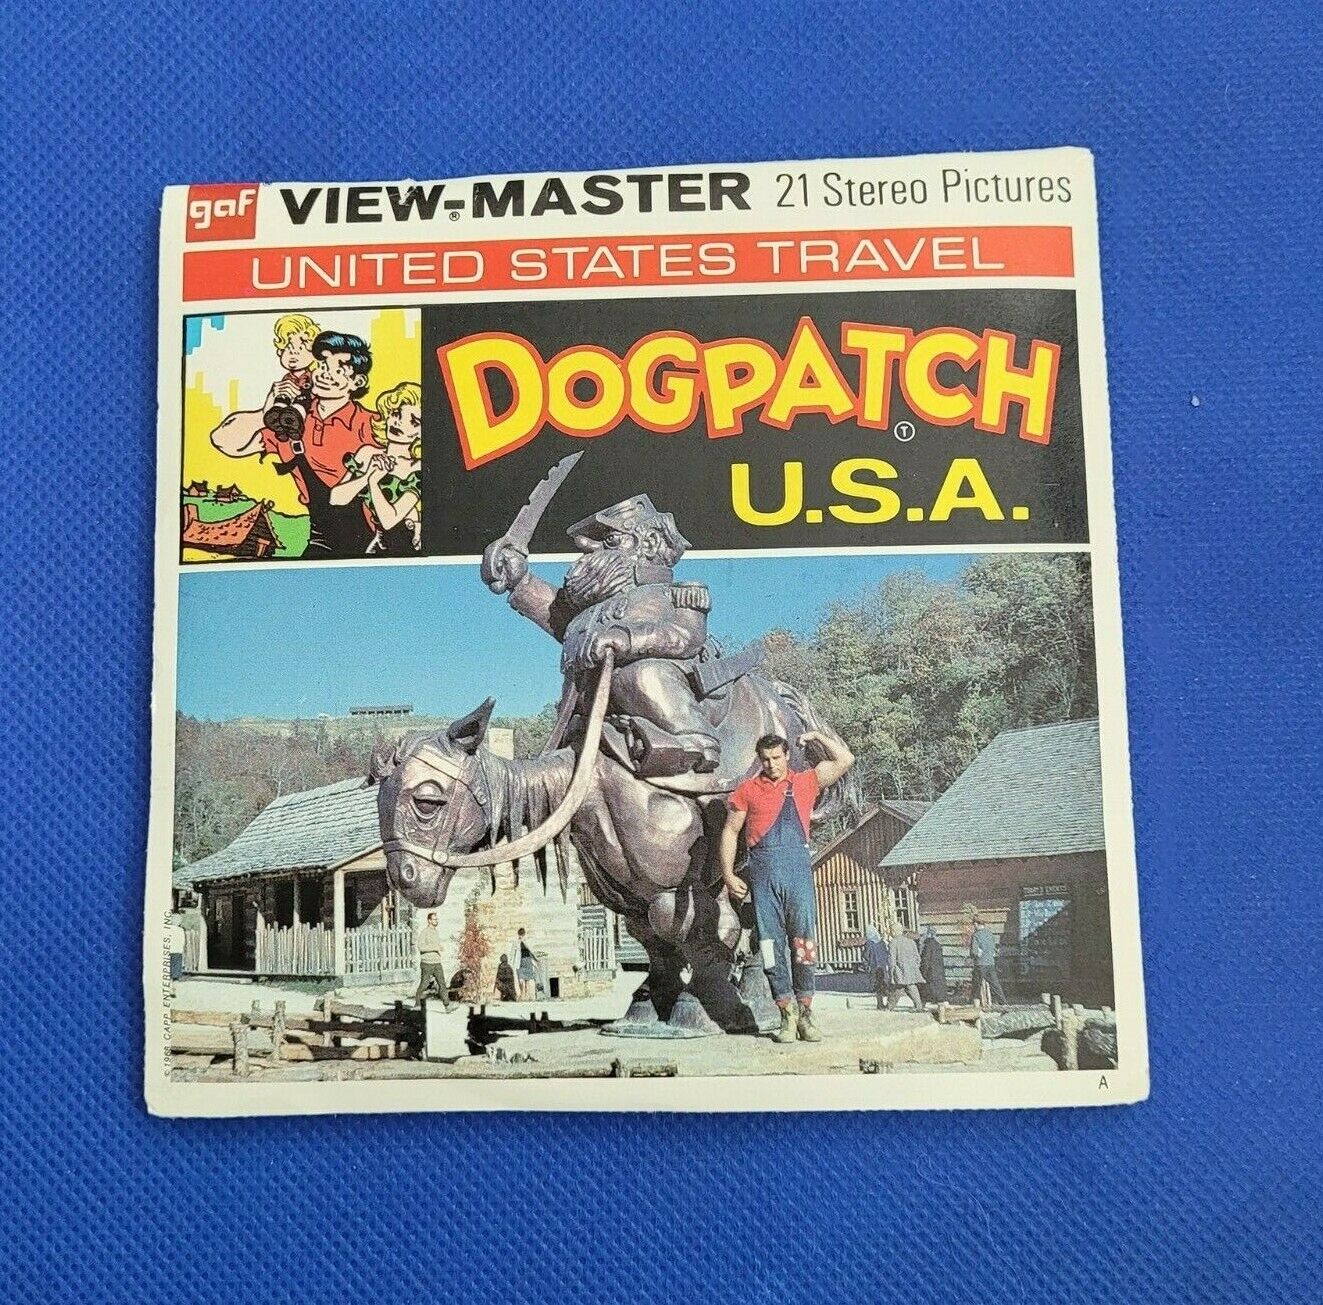 Rare Gaf A442 Dogpatch Dog Patch USA Marble Falls AR view-master 3 Reels Packet